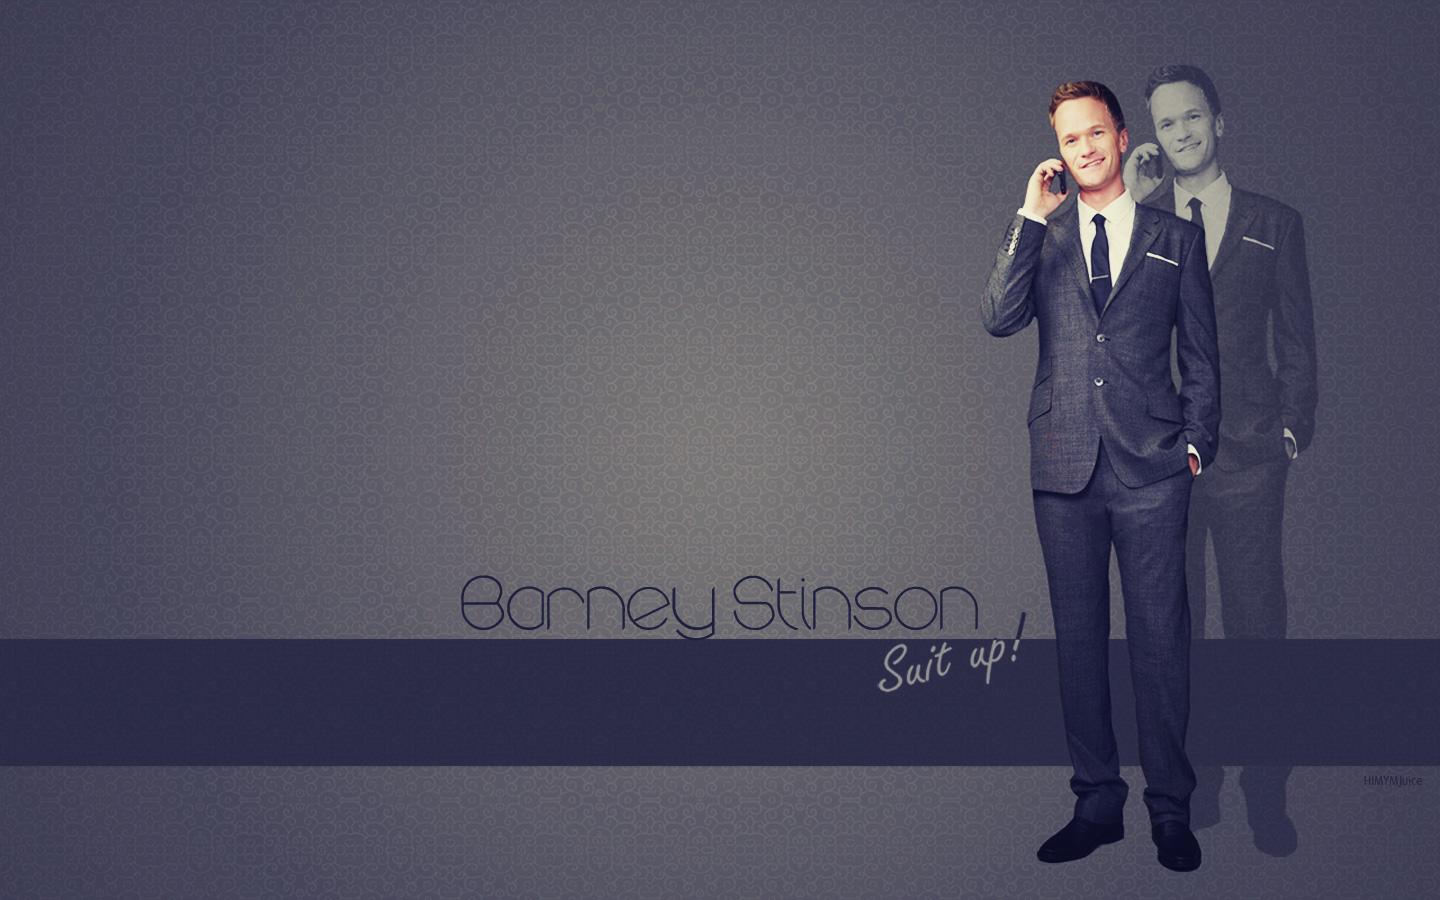 Picture Of Barney Stinson Suit Up Wallpaper #rock Cafe